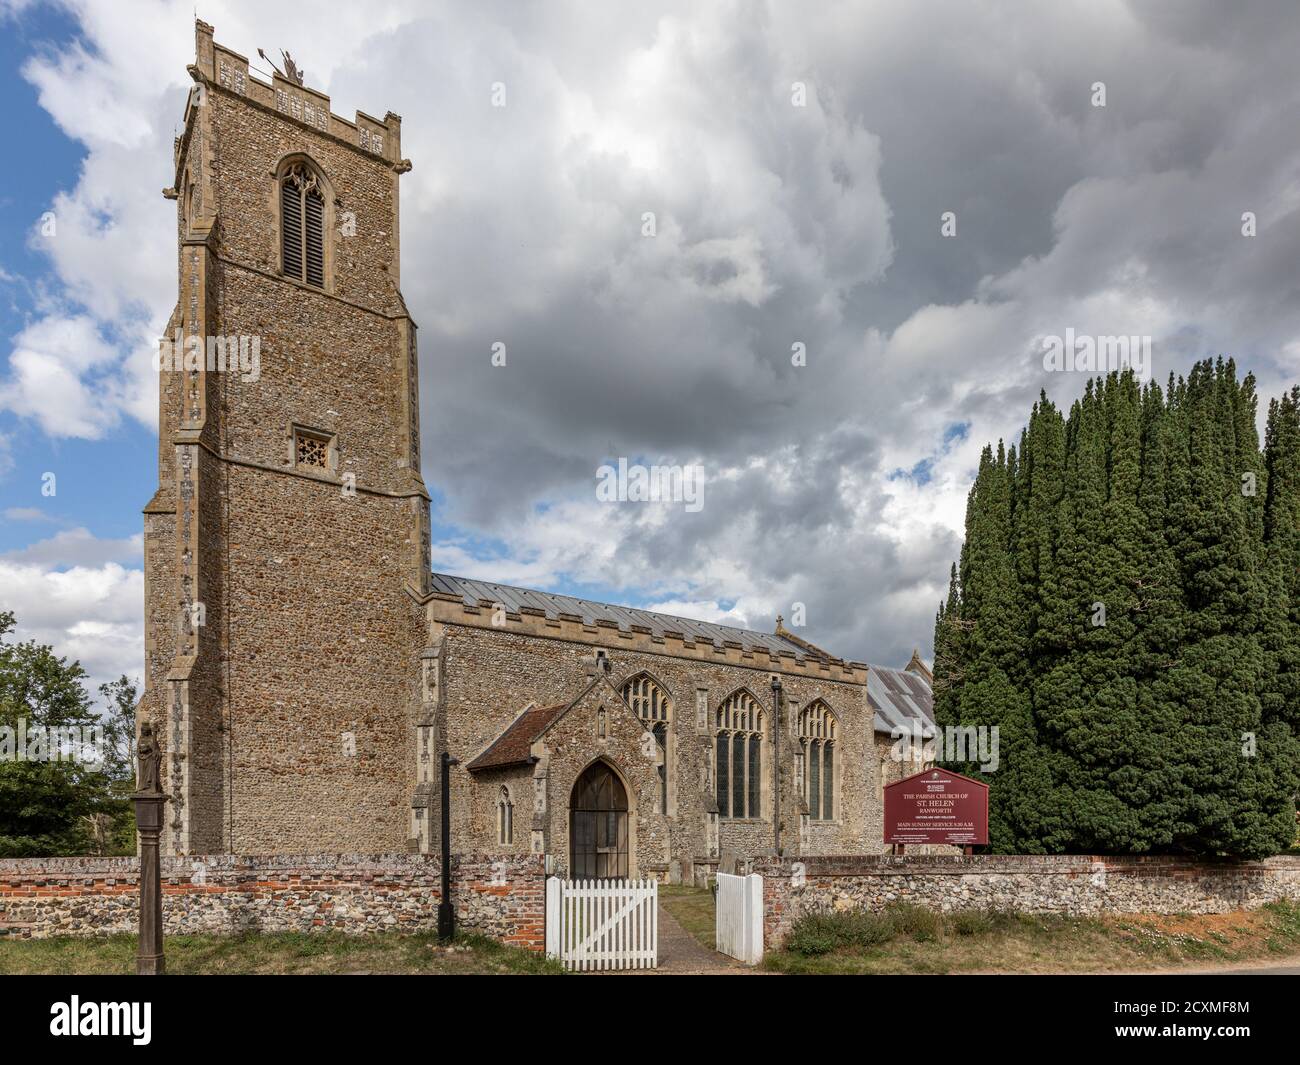 St Helen's Church, Ranworth. Dating back to 1450, the grade I listed church of St Helen is often called ‘The Cathedral of the Broads’. Stock Photo